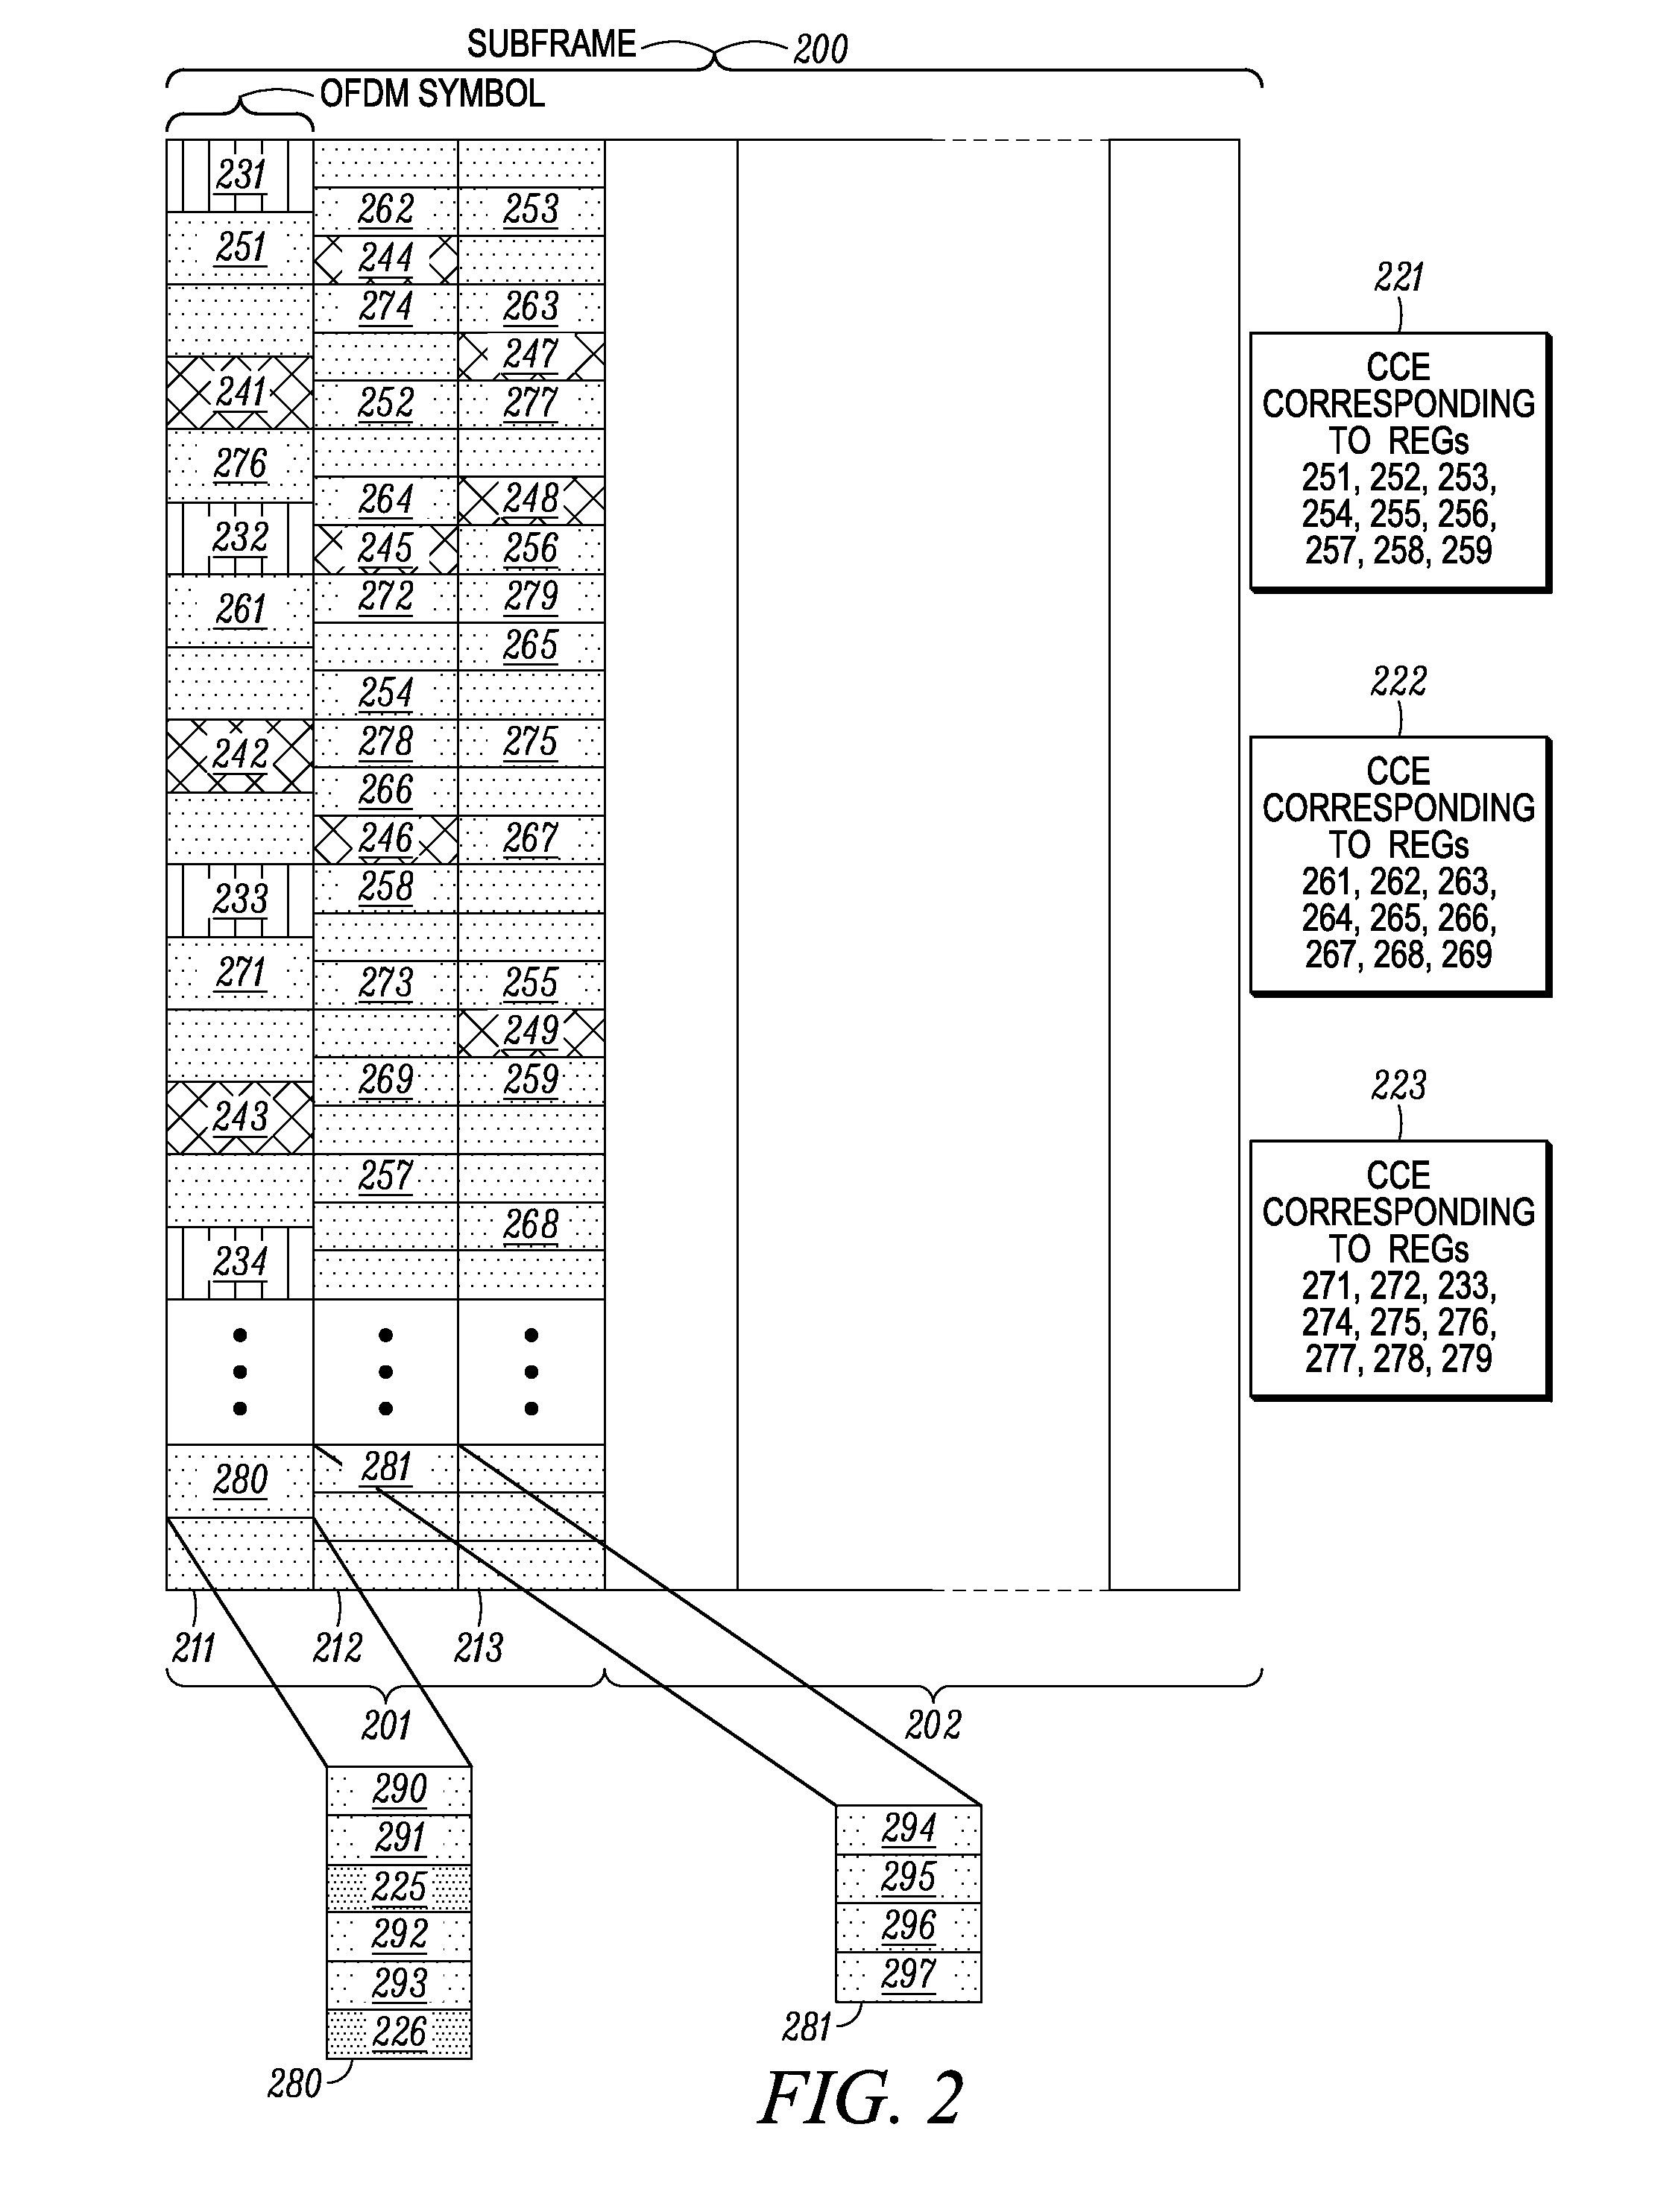 Subframe Component Reduction and Notification in a Heterogeneous Wireless Communication System